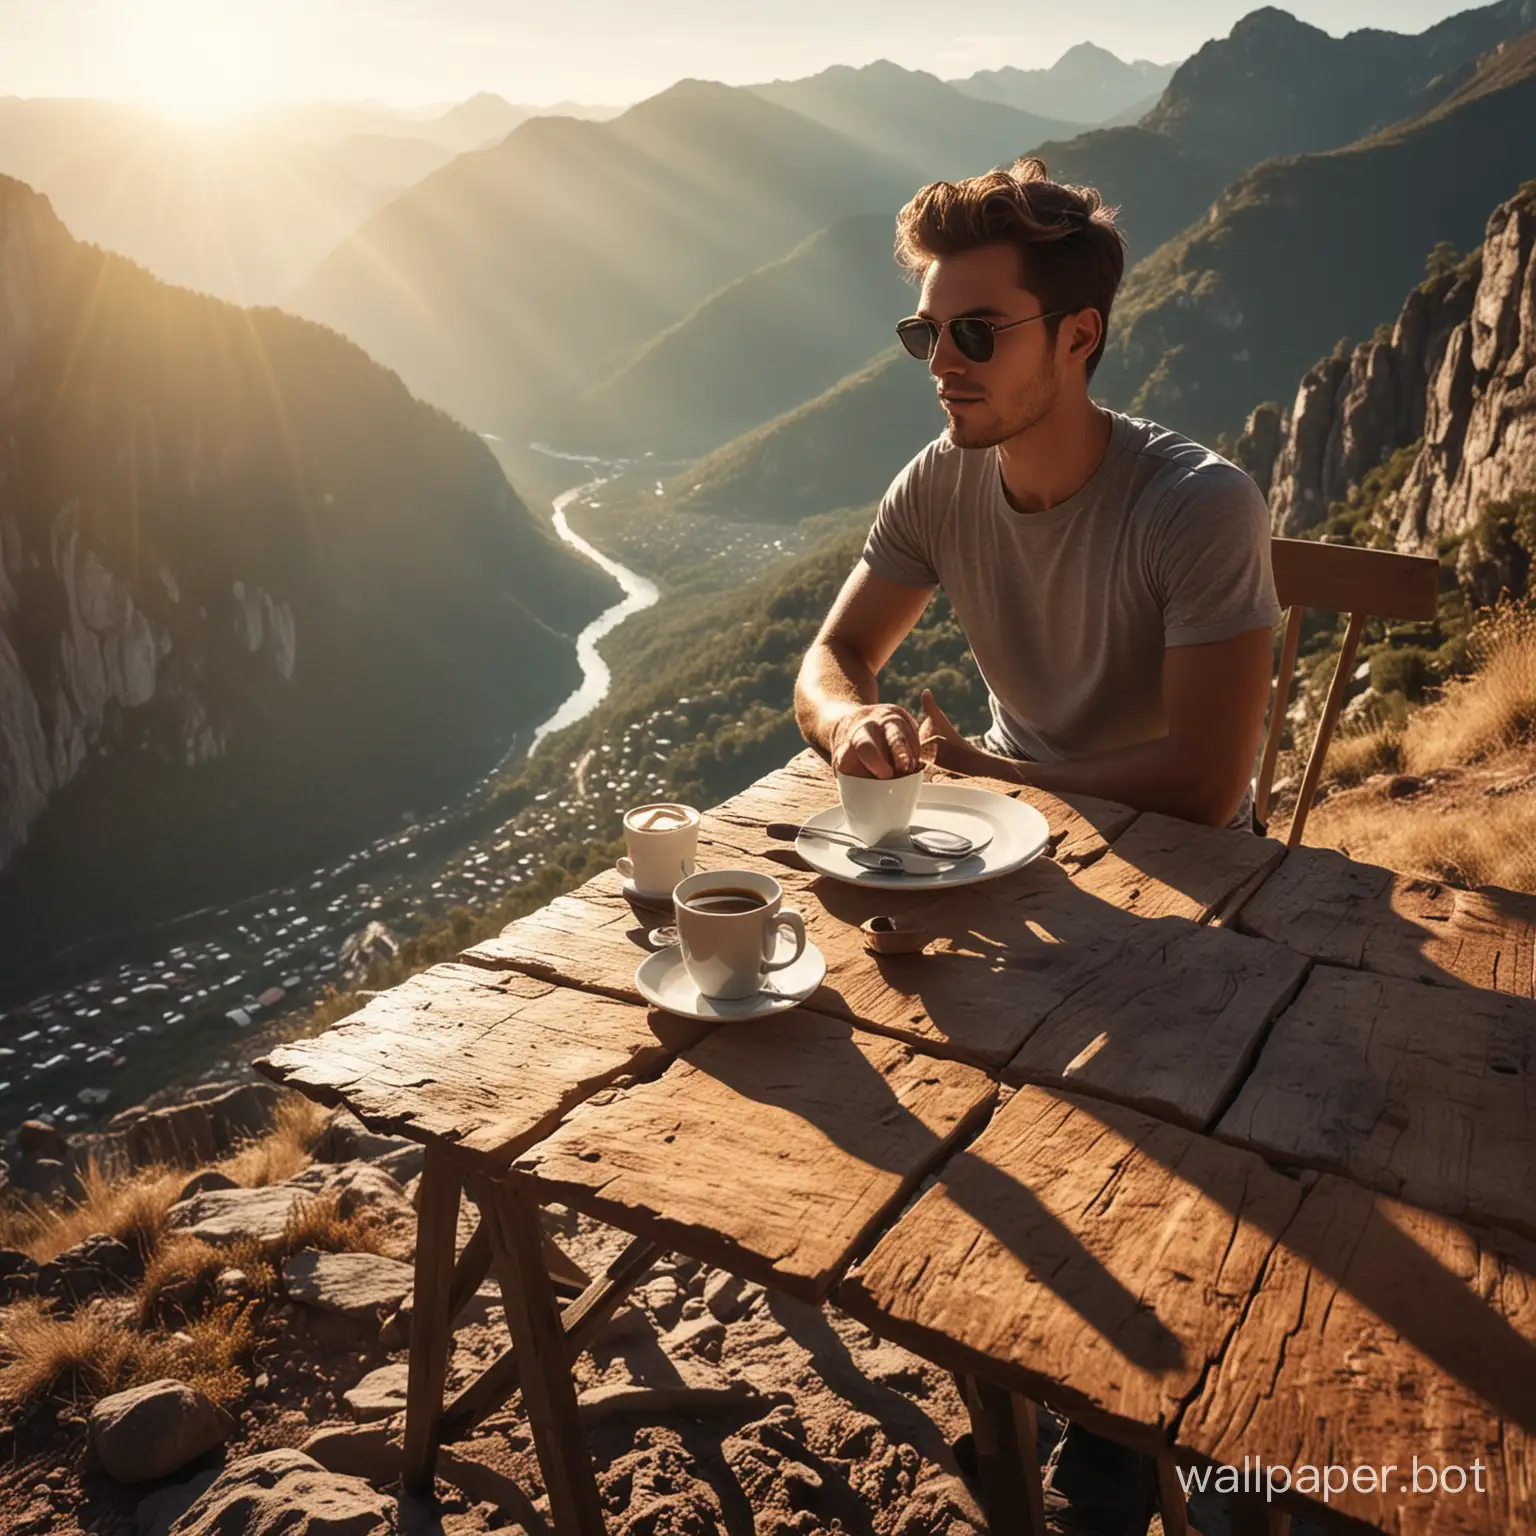 A young man sitting on the mountain, morning light, close-up, there is a table beside him with coffee on it, wearing sunglasses, beautiful scenery, shadows, intricate details, complex details, ultra-high definition, cinematic feeling